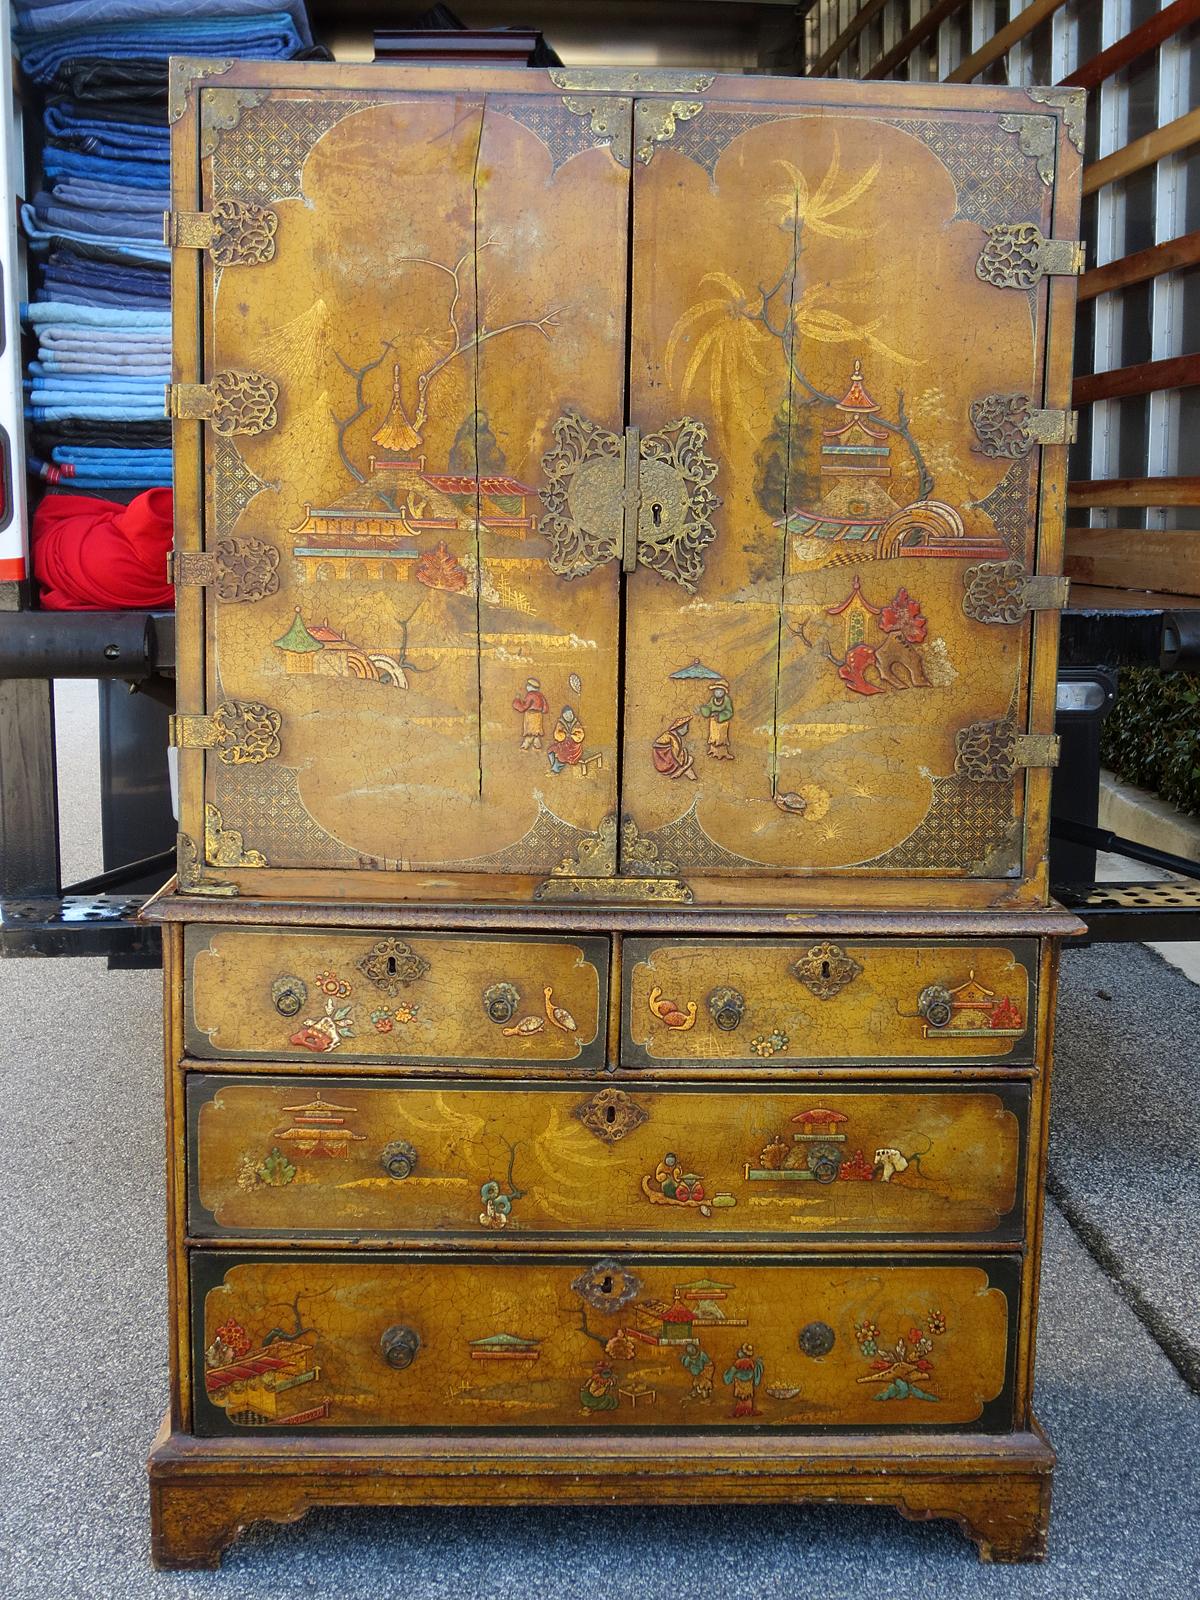 18th-19th century chinoiserie cabinet. Probably English